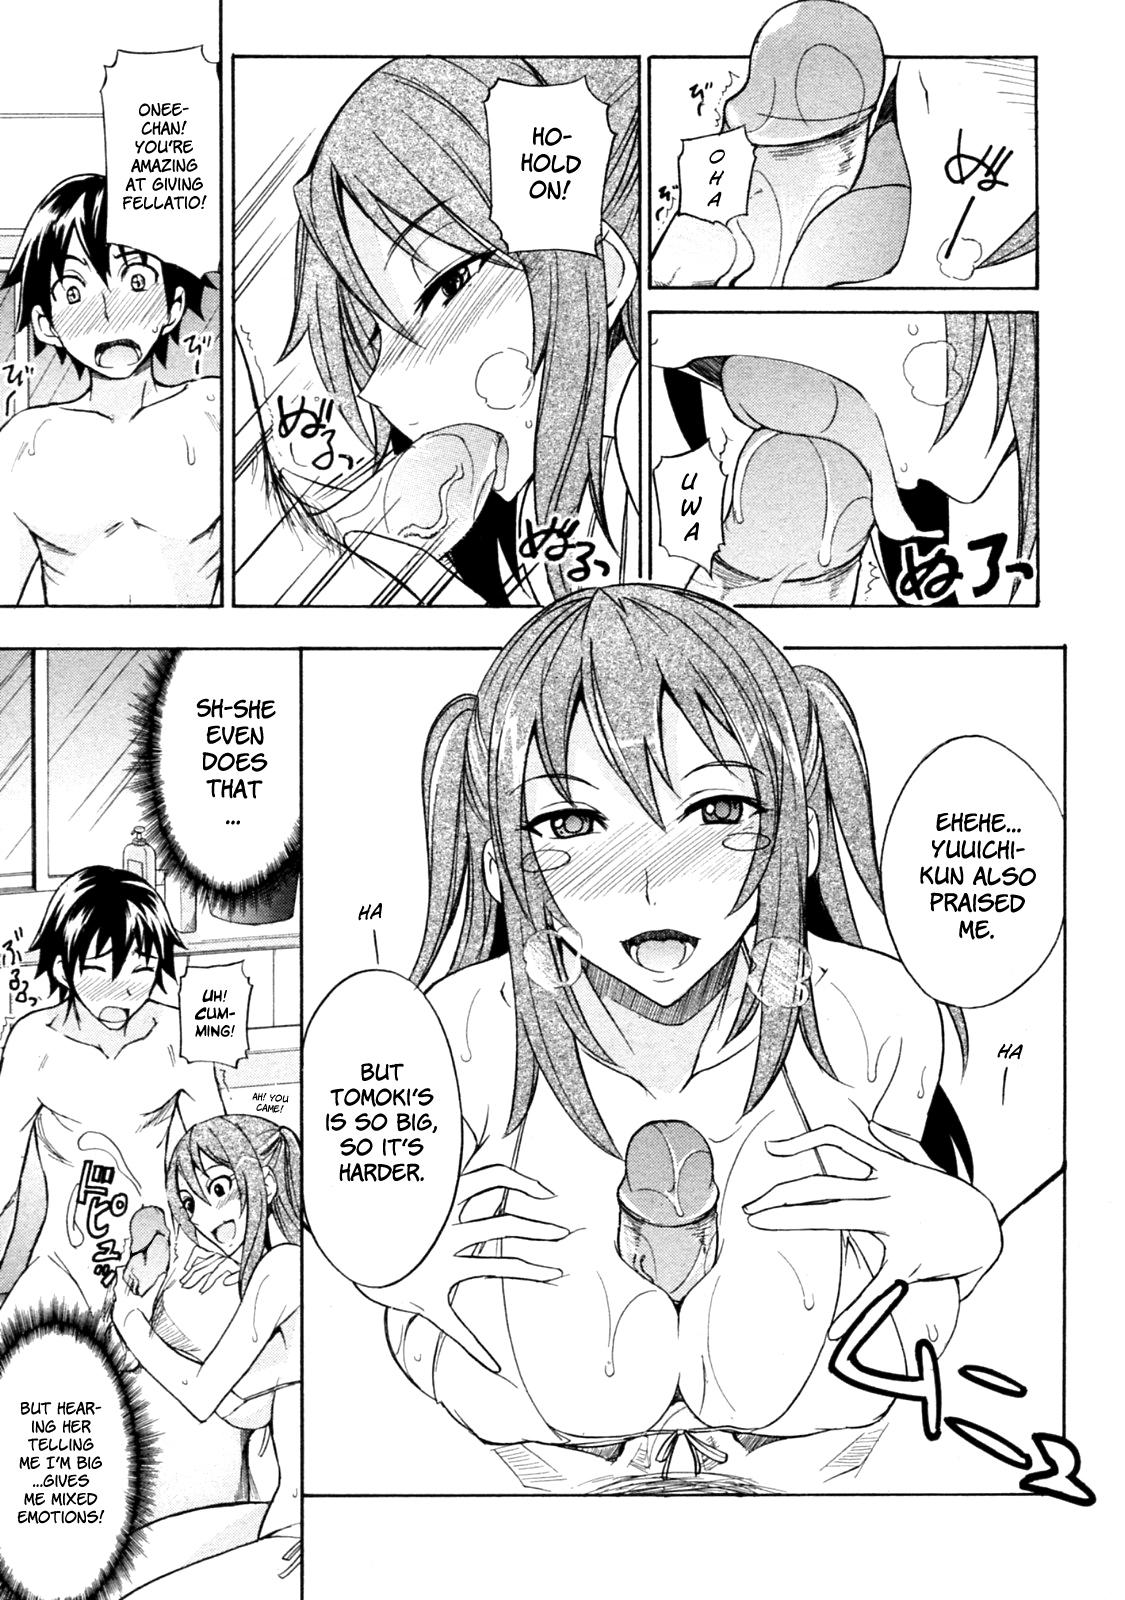 Romantic Mizugi to Oneechan! | Swimsuit and Onee-chan! Bed - Page 11